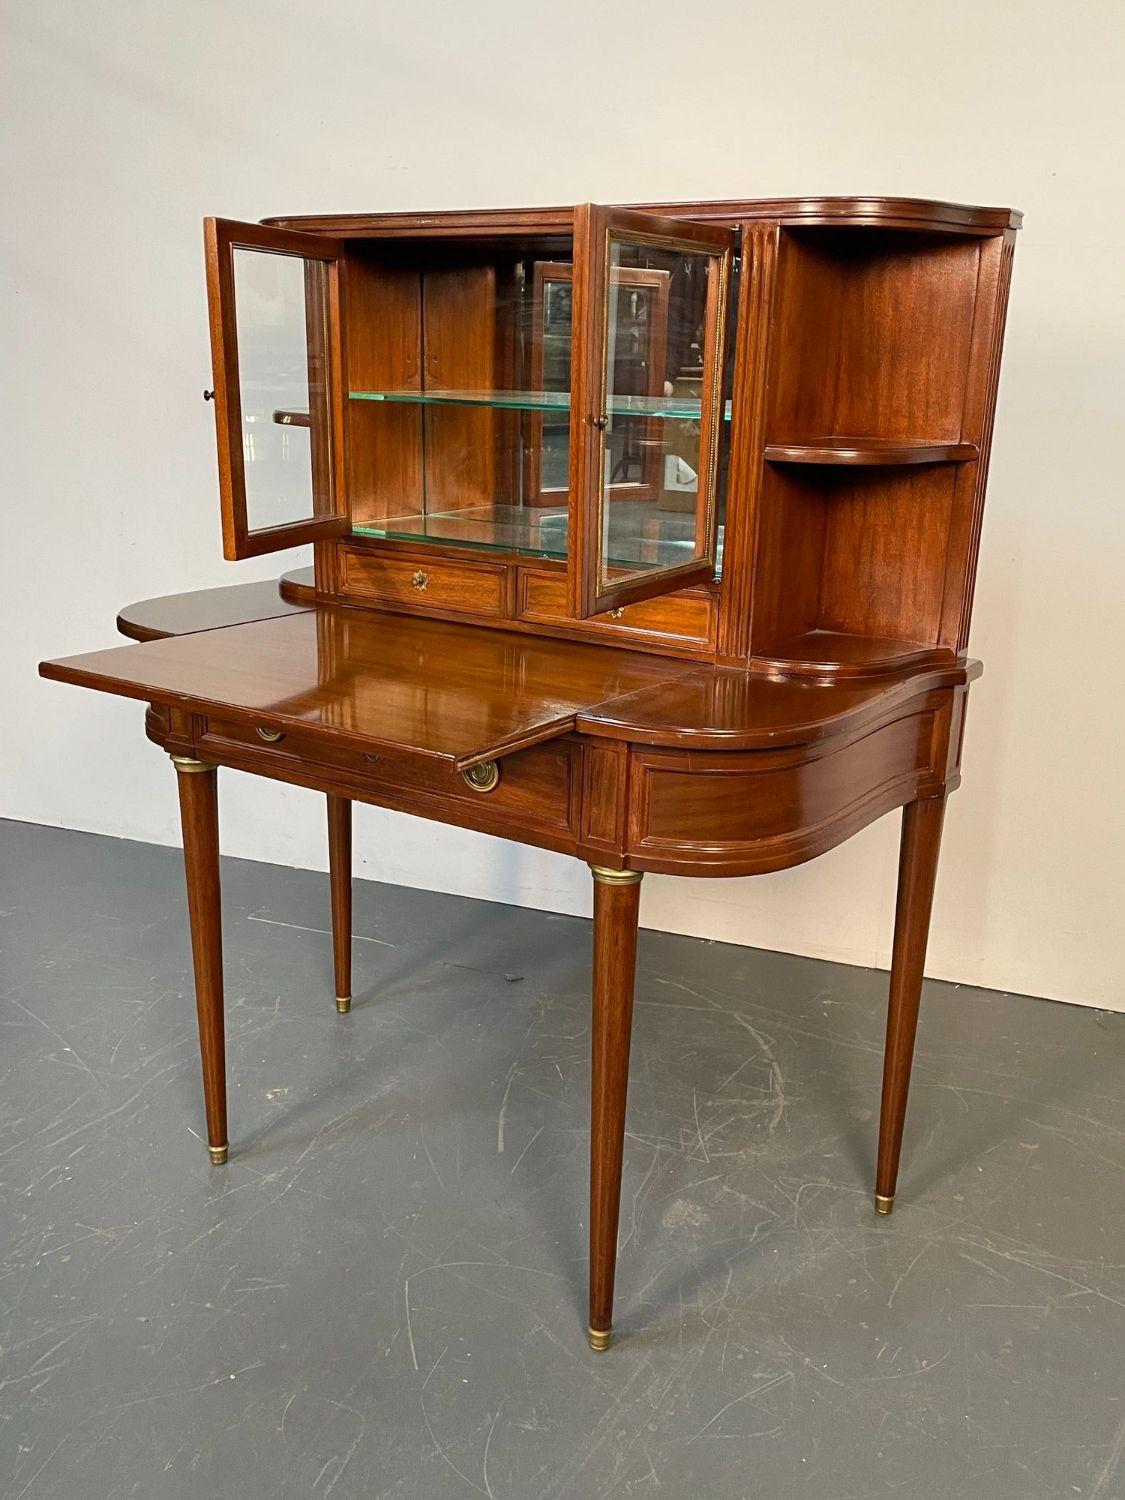 Stamped Jansen Mahogany Desk, Curio Cabinet, Bookcase or Vitrine, Louis XVI 
A finely constructed two-door curio cabinet paneled with bronze beaded banding flanked by two shelf-display, atop a demilune-shaped desk with pull-out writing surface over